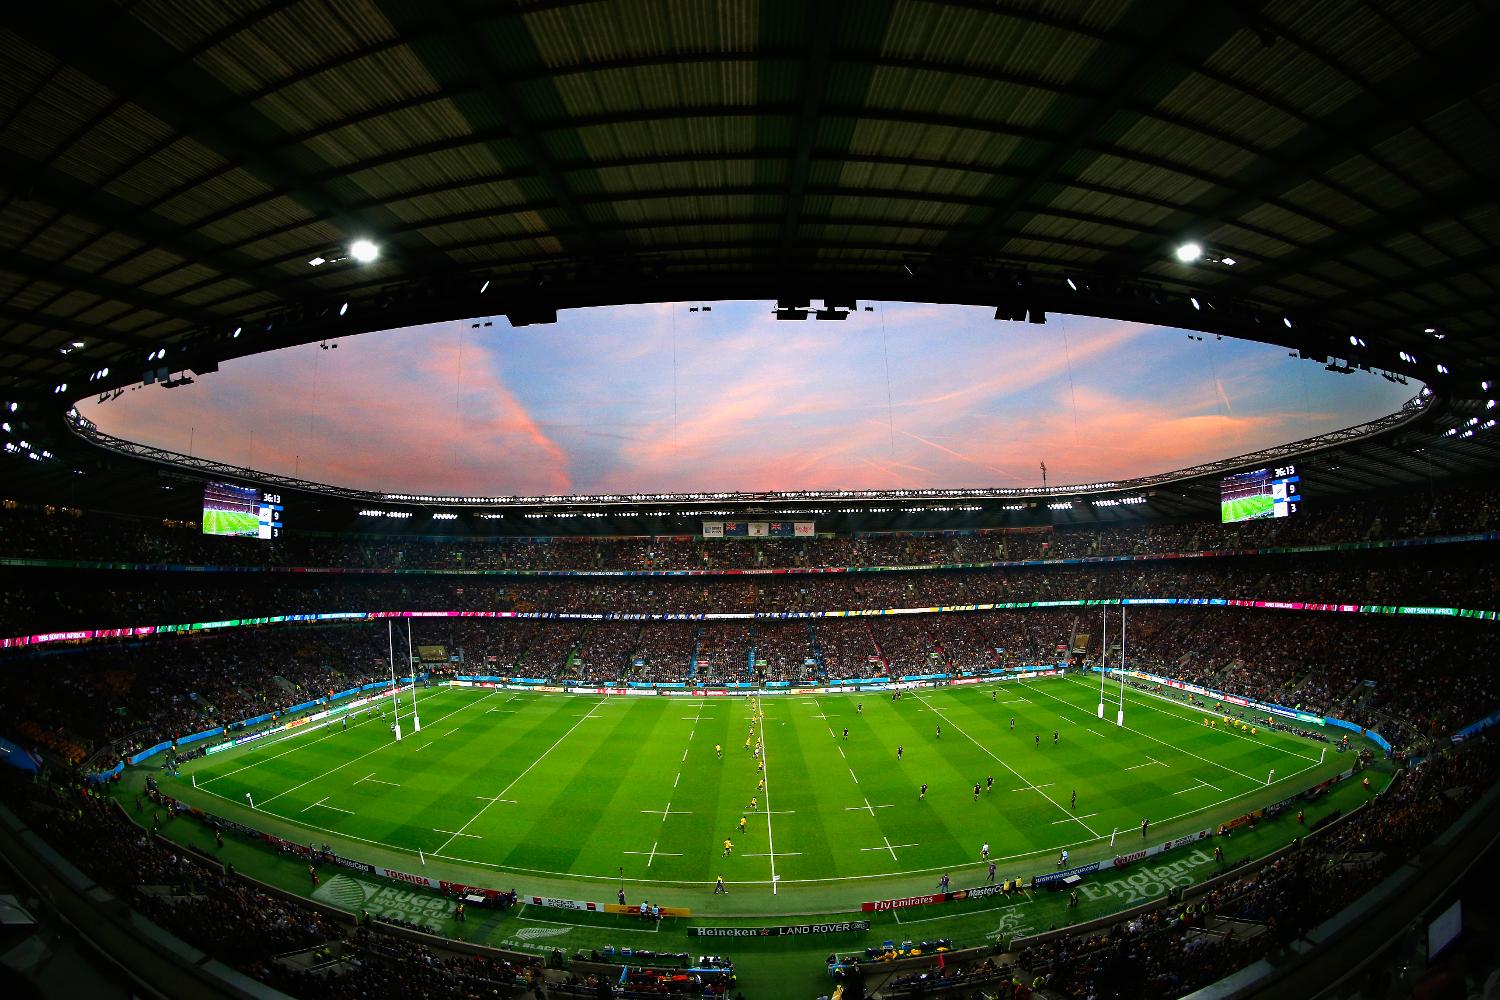 NHK to broadcast Rugby World Cup in 8K